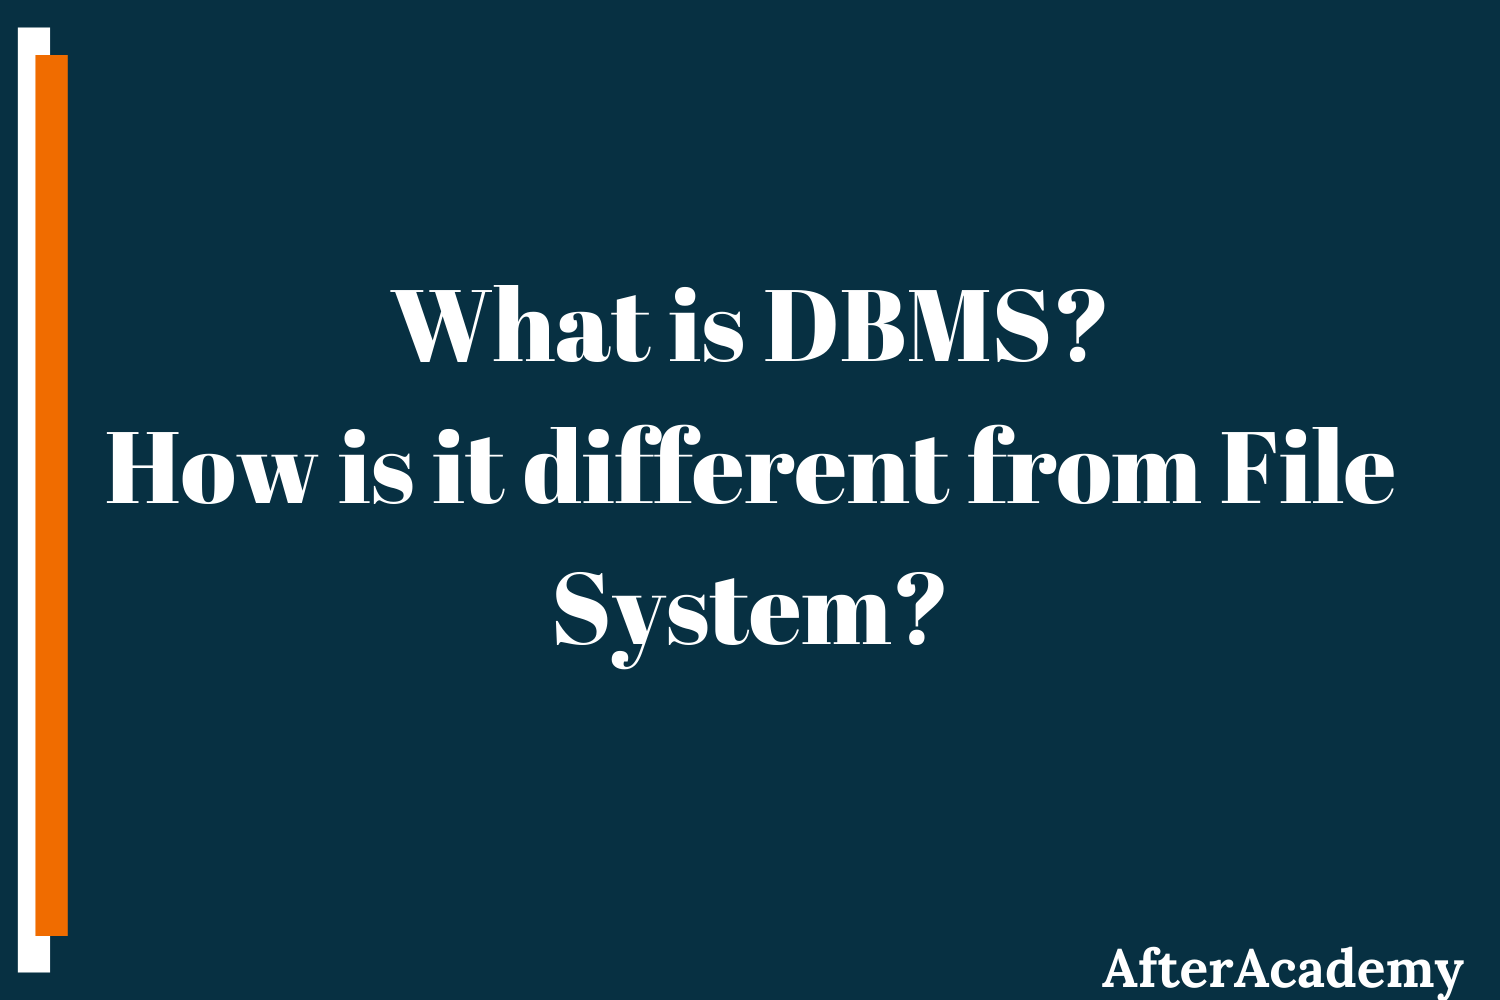 What is a Database Management System and how is it different from a File System?